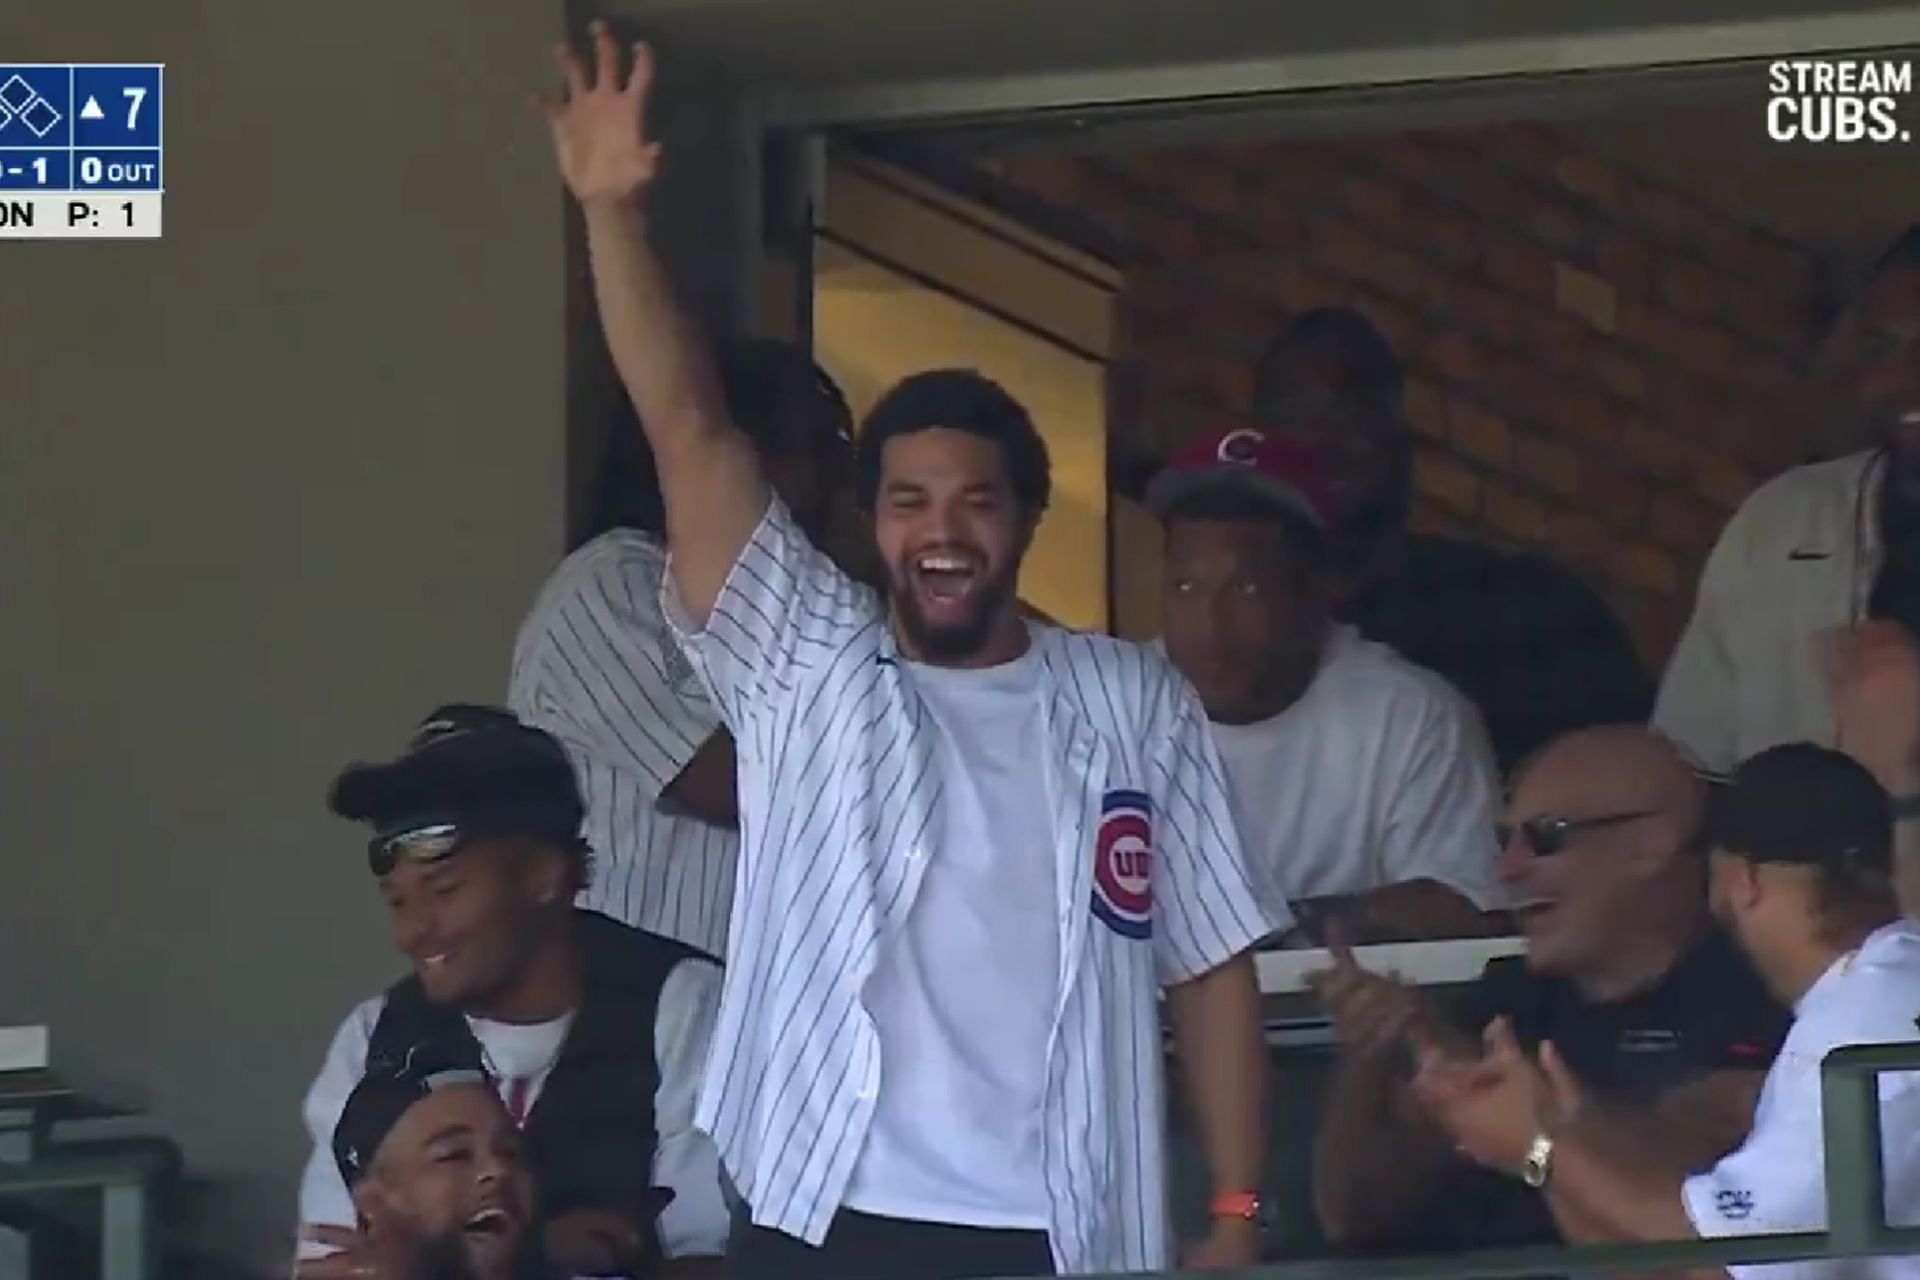 Caleb Williams gets massive ovation at Wrigley Field as Chicago embraces new Bears QB